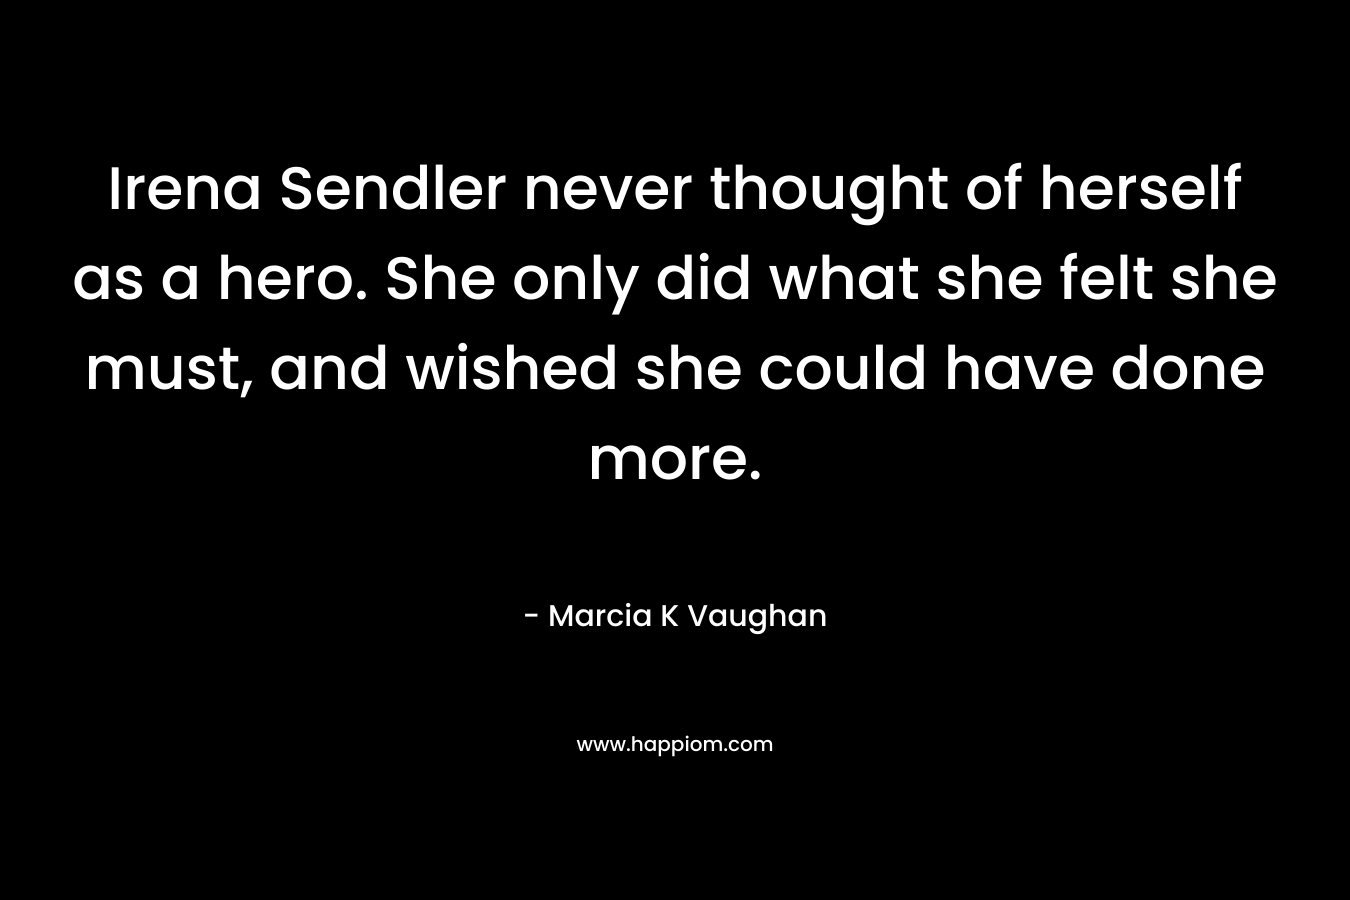 Irena Sendler never thought of herself as a hero. She only did what she felt she must, and wished she could have done more.